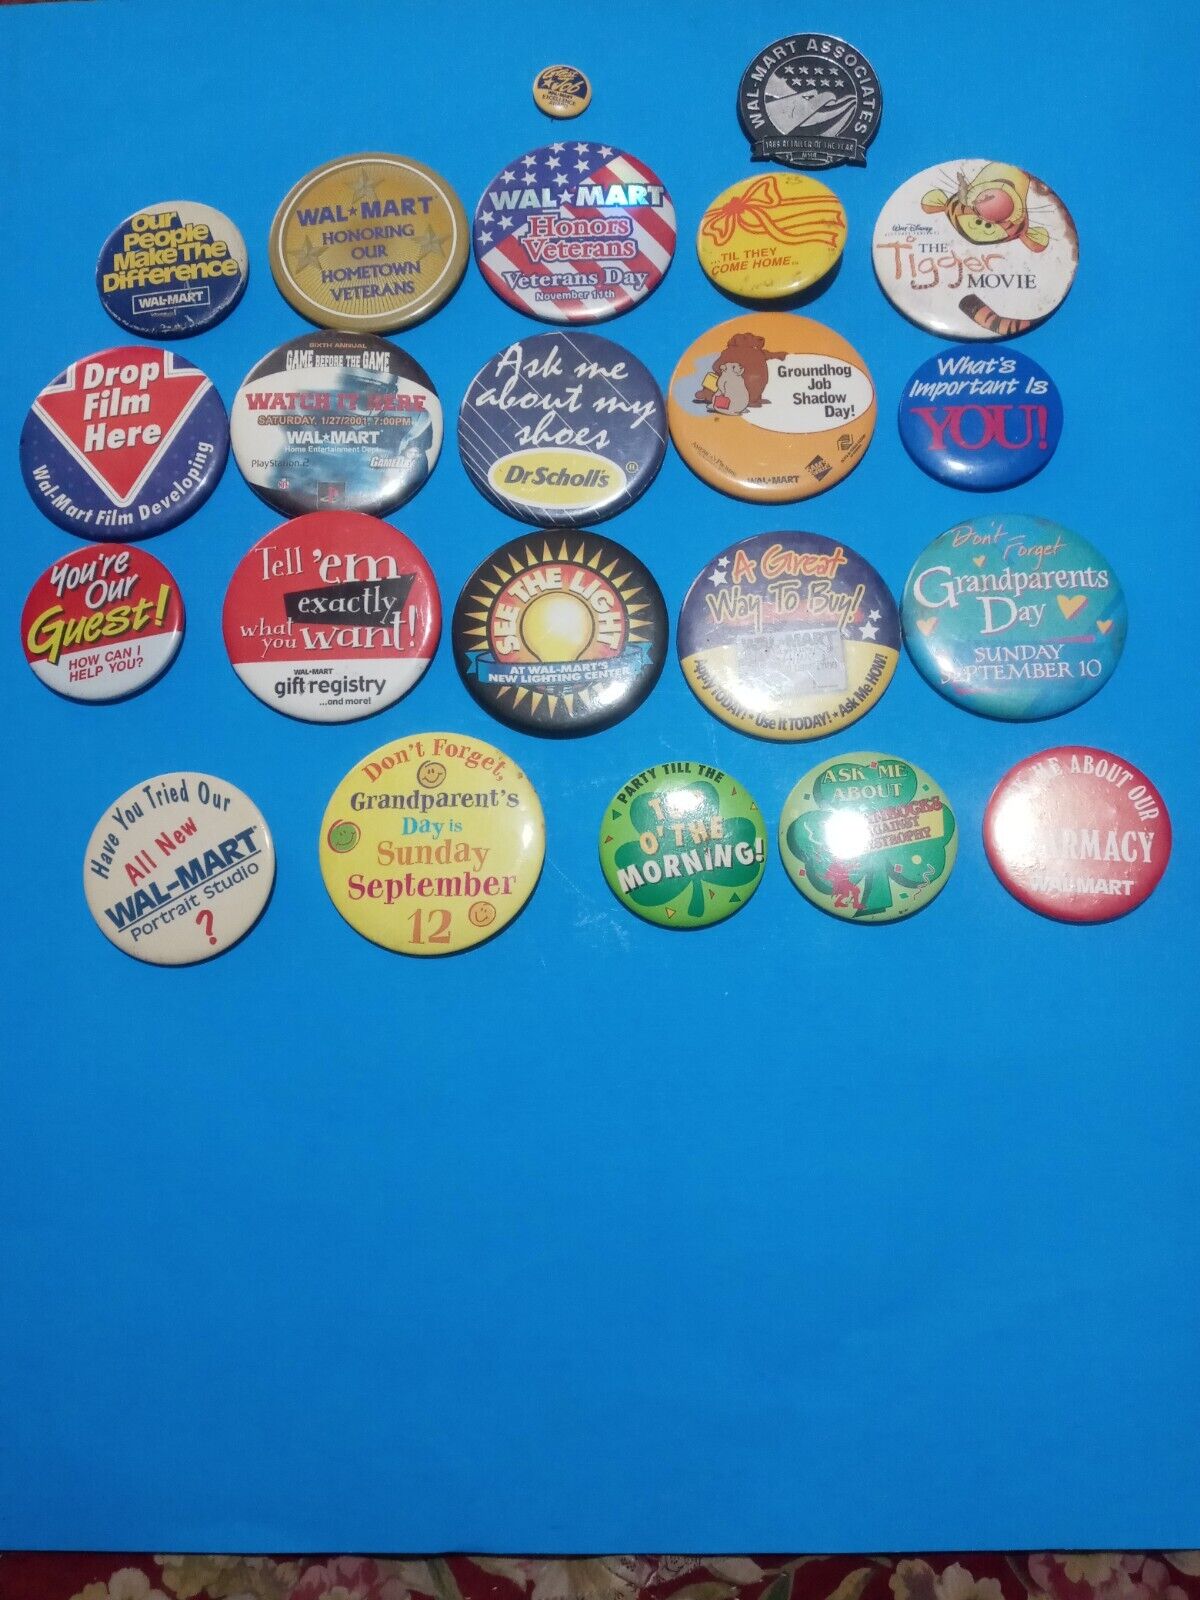 22 Walmart Employee Promotional Advertising Round Pin Back Buttons Lot